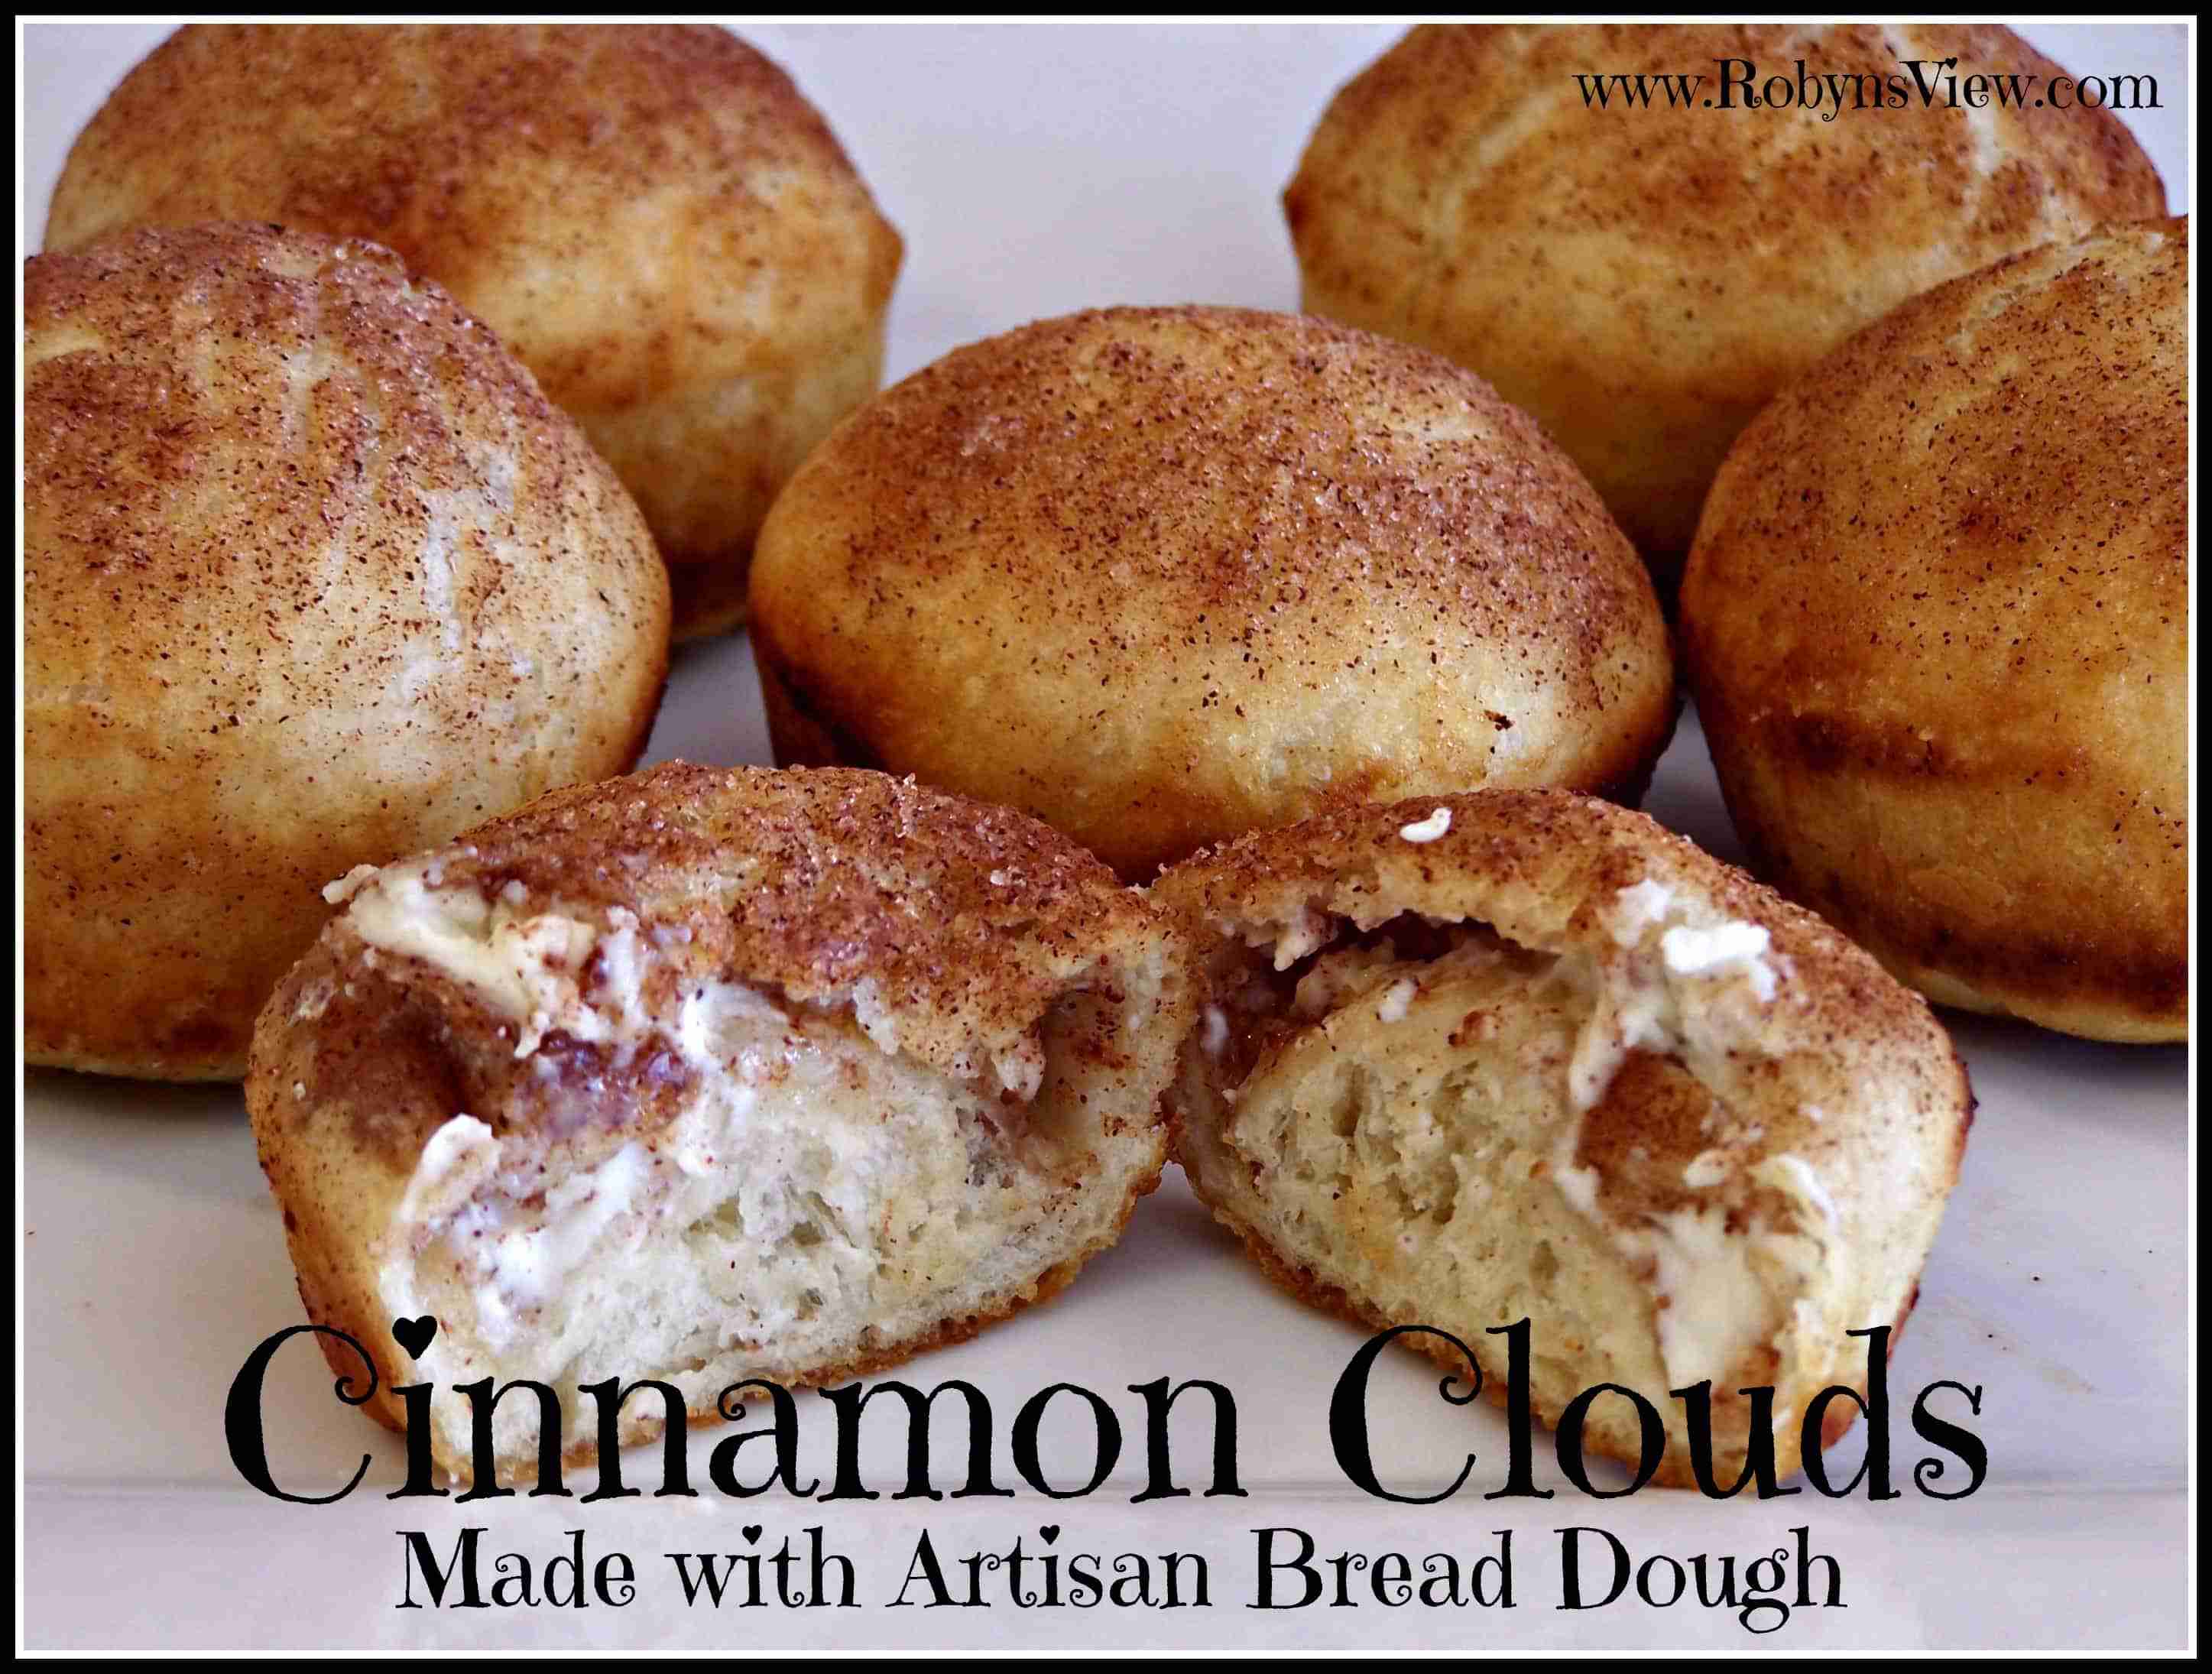 Cinnamon Clouds made with Artisan Bread Dough